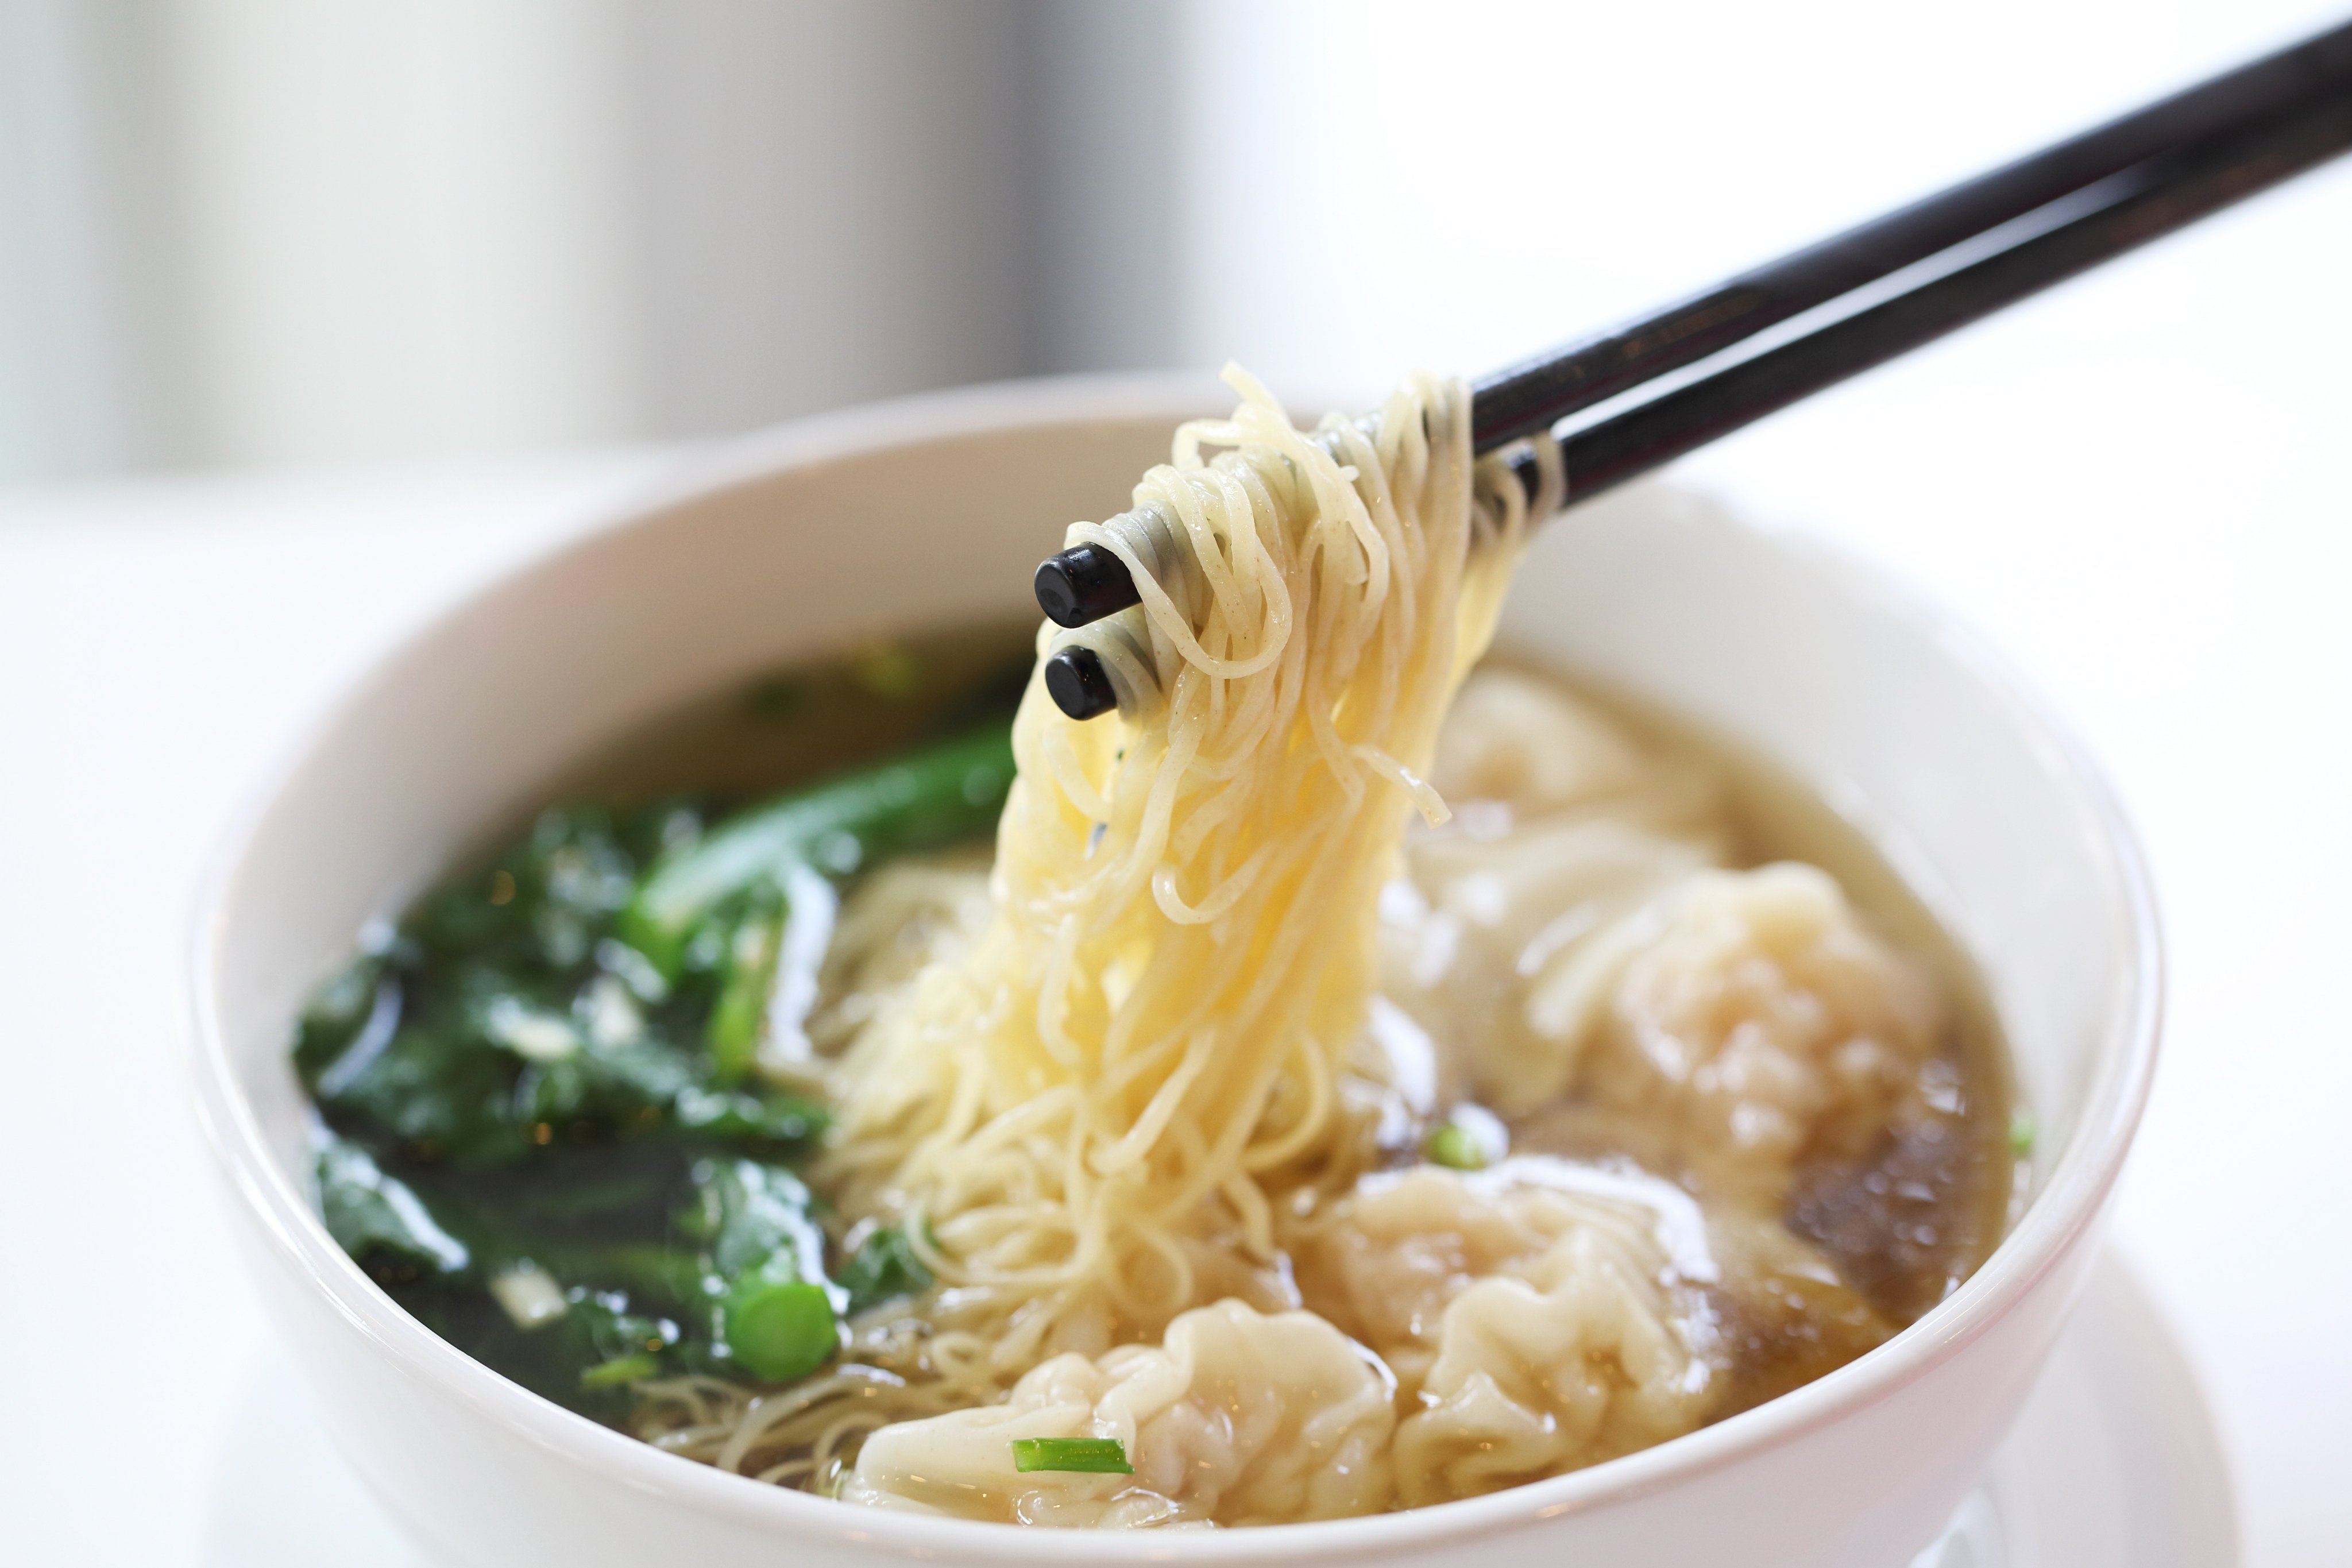 China has had a huge influence on its neighbours during its 3,000 years of history, and its cultural exports to East Asia and the wider world include tea, writing, noodles (above) and tofu. Photo: Shutterstock